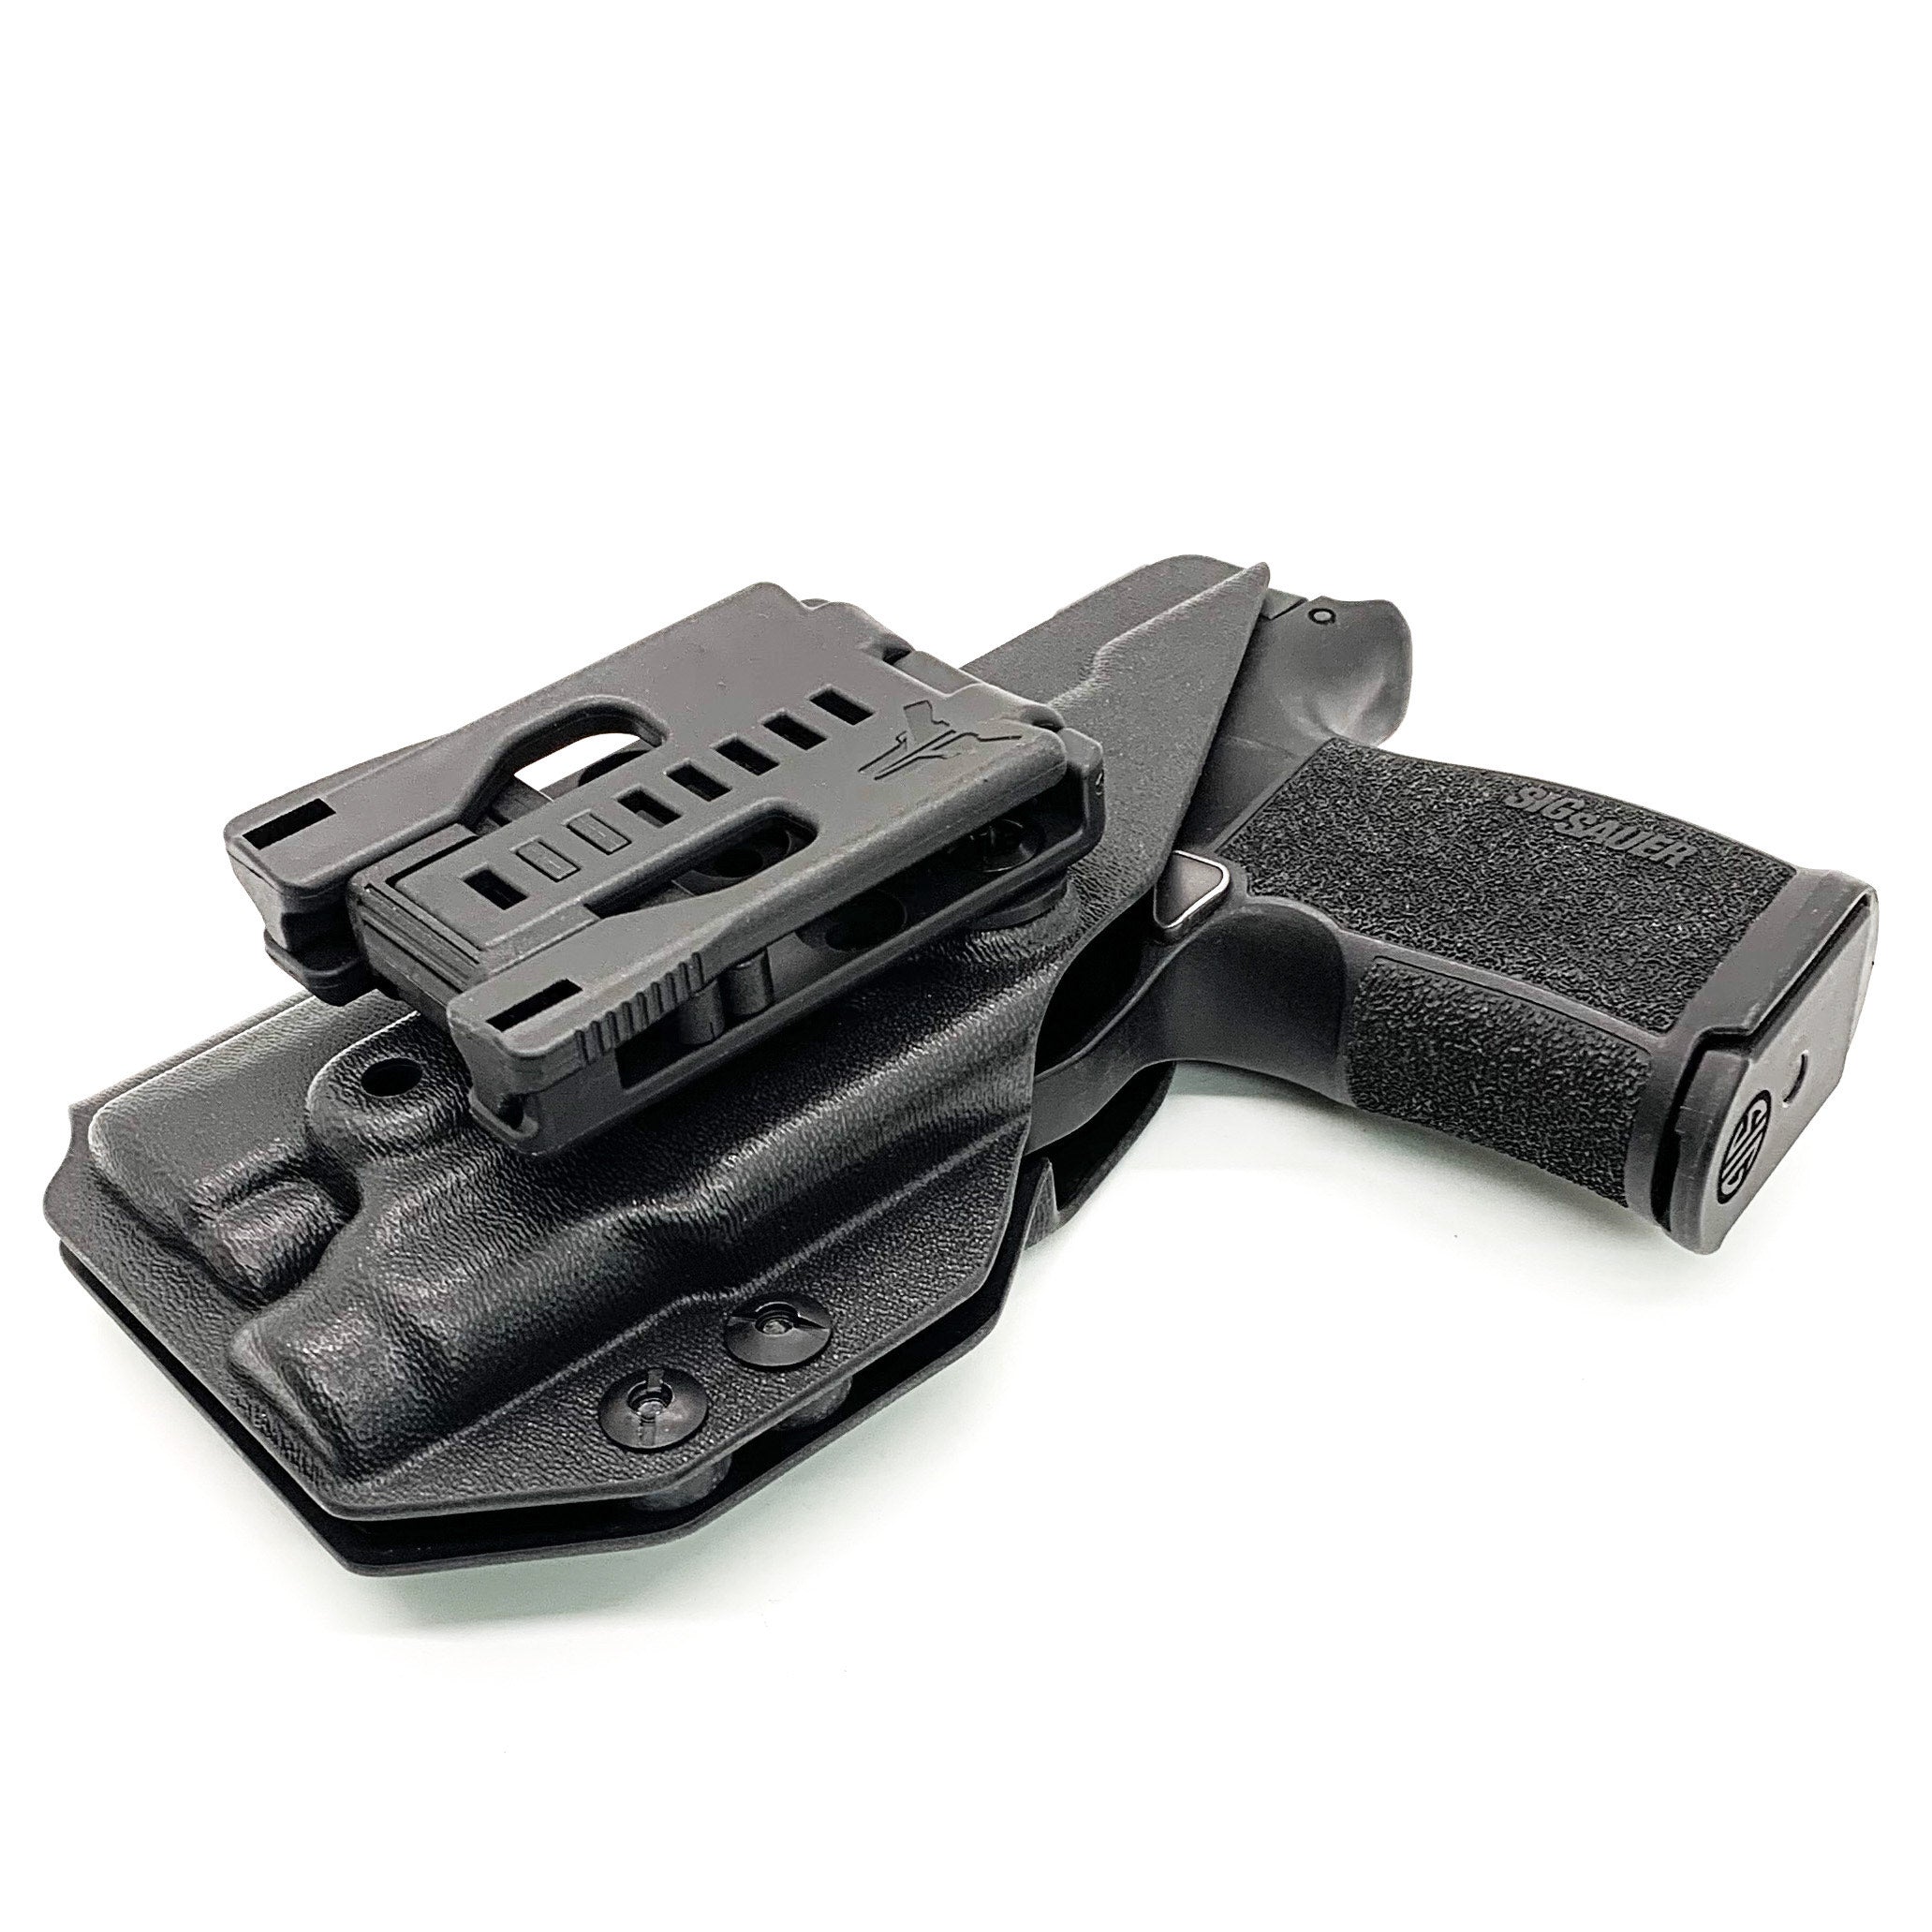 Outside Waistband Holster designed to fit the Sig Sauer P365XL pistol with the Streamlight TLR-7 Sub light mounted to the handgun. Full sweat guard, adjustable retention, minimal material and smooth edges to reduce printing. Made in the USA. 